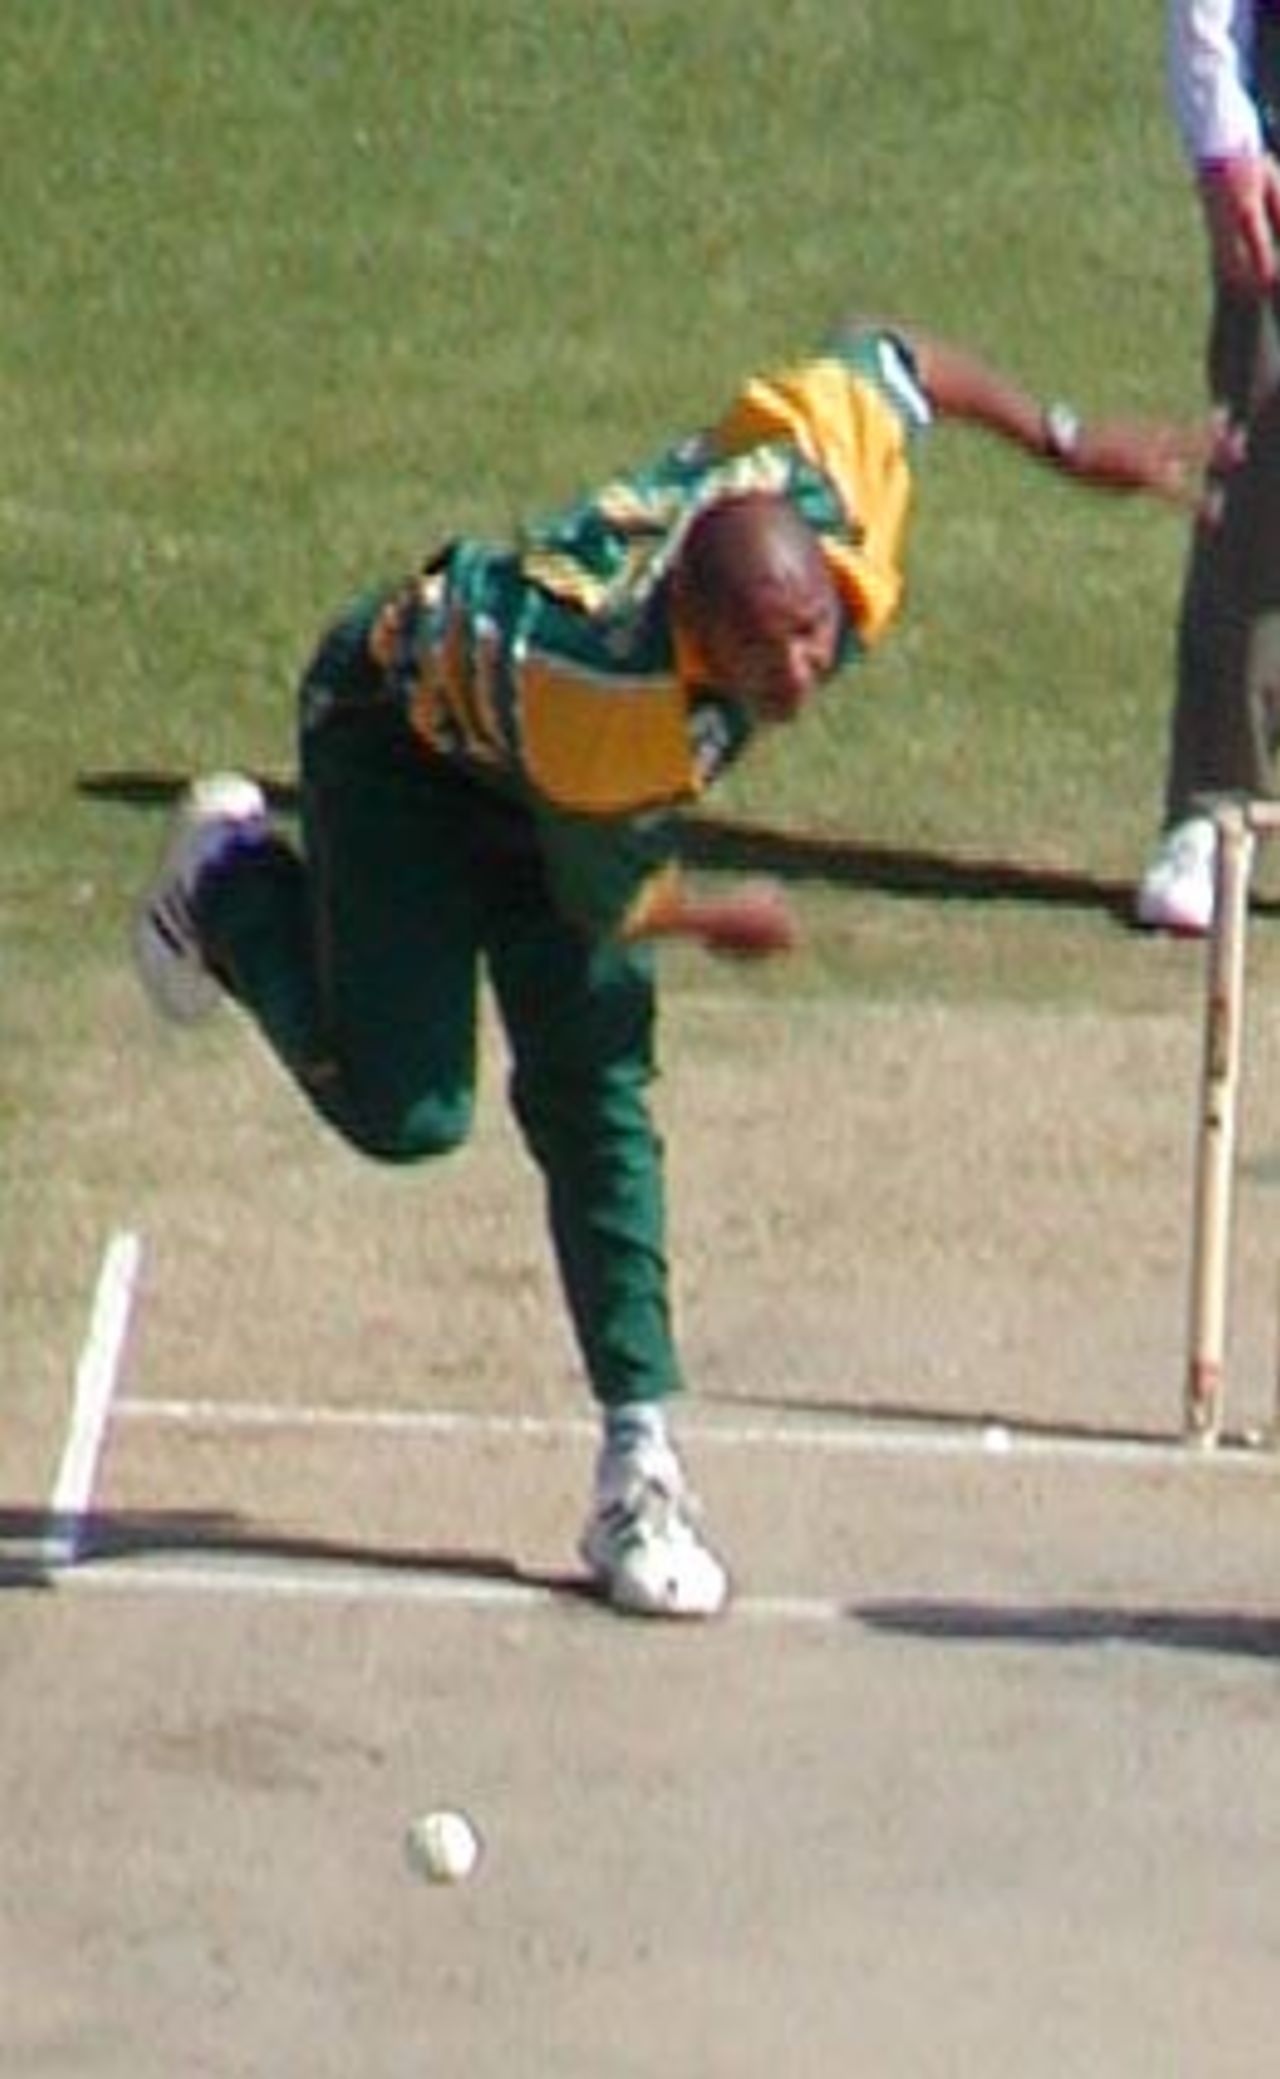 Telemachus in action, Morocco Cup, Final ODI at Tangiers, South Africa v Sri Lanka, 21 Aug 2002